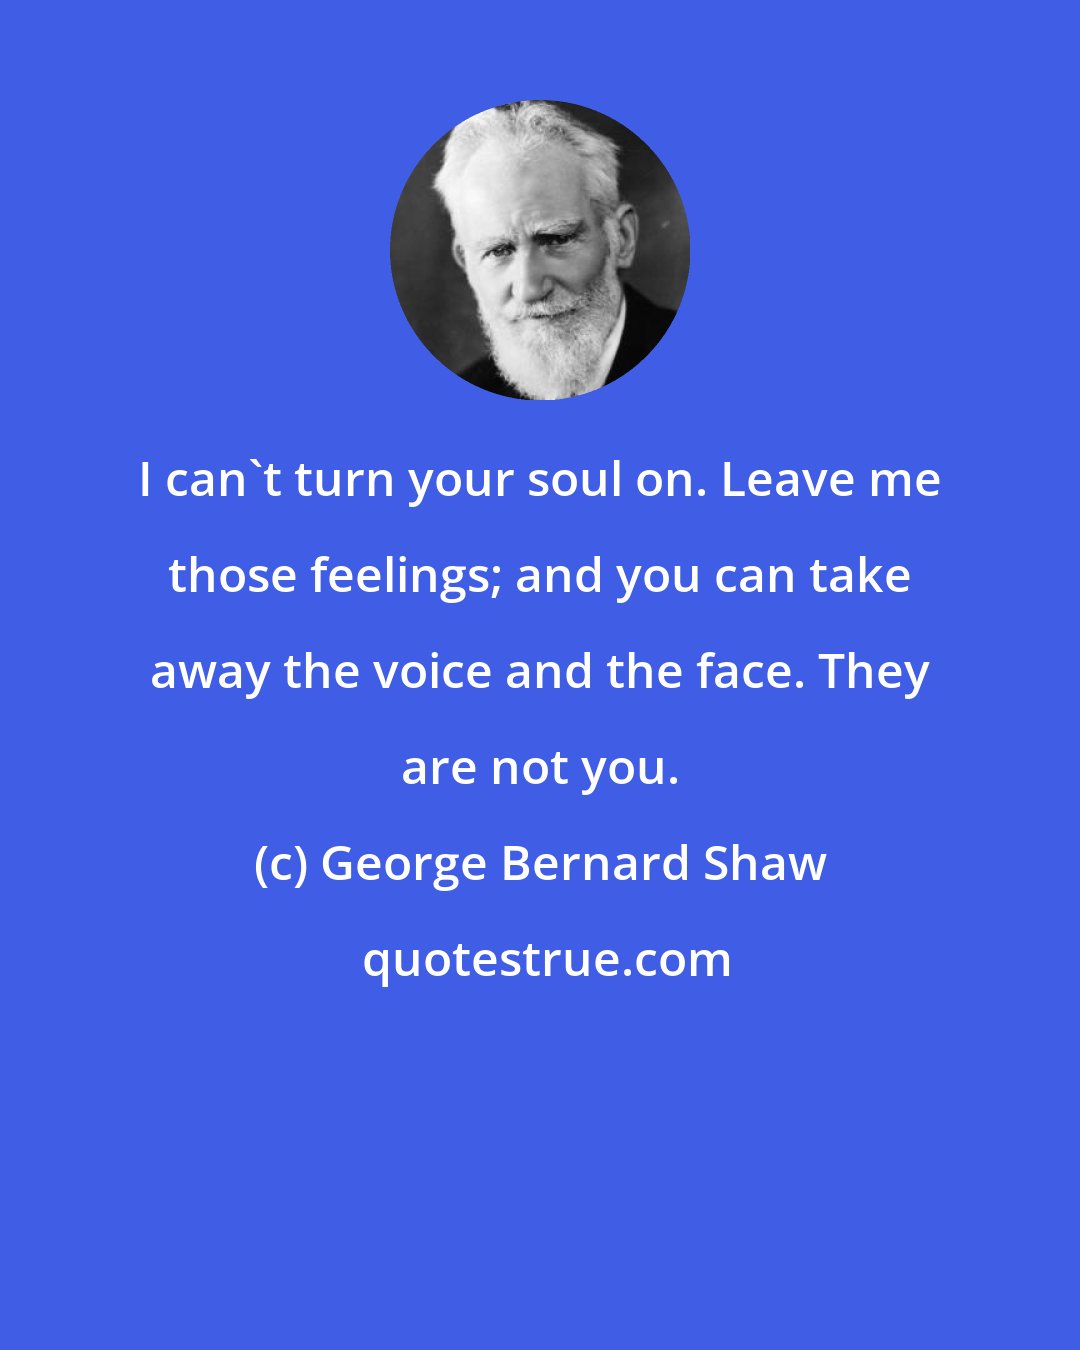 George Bernard Shaw: I can't turn your soul on. Leave me those feelings; and you can take away the voice and the face. They are not you.